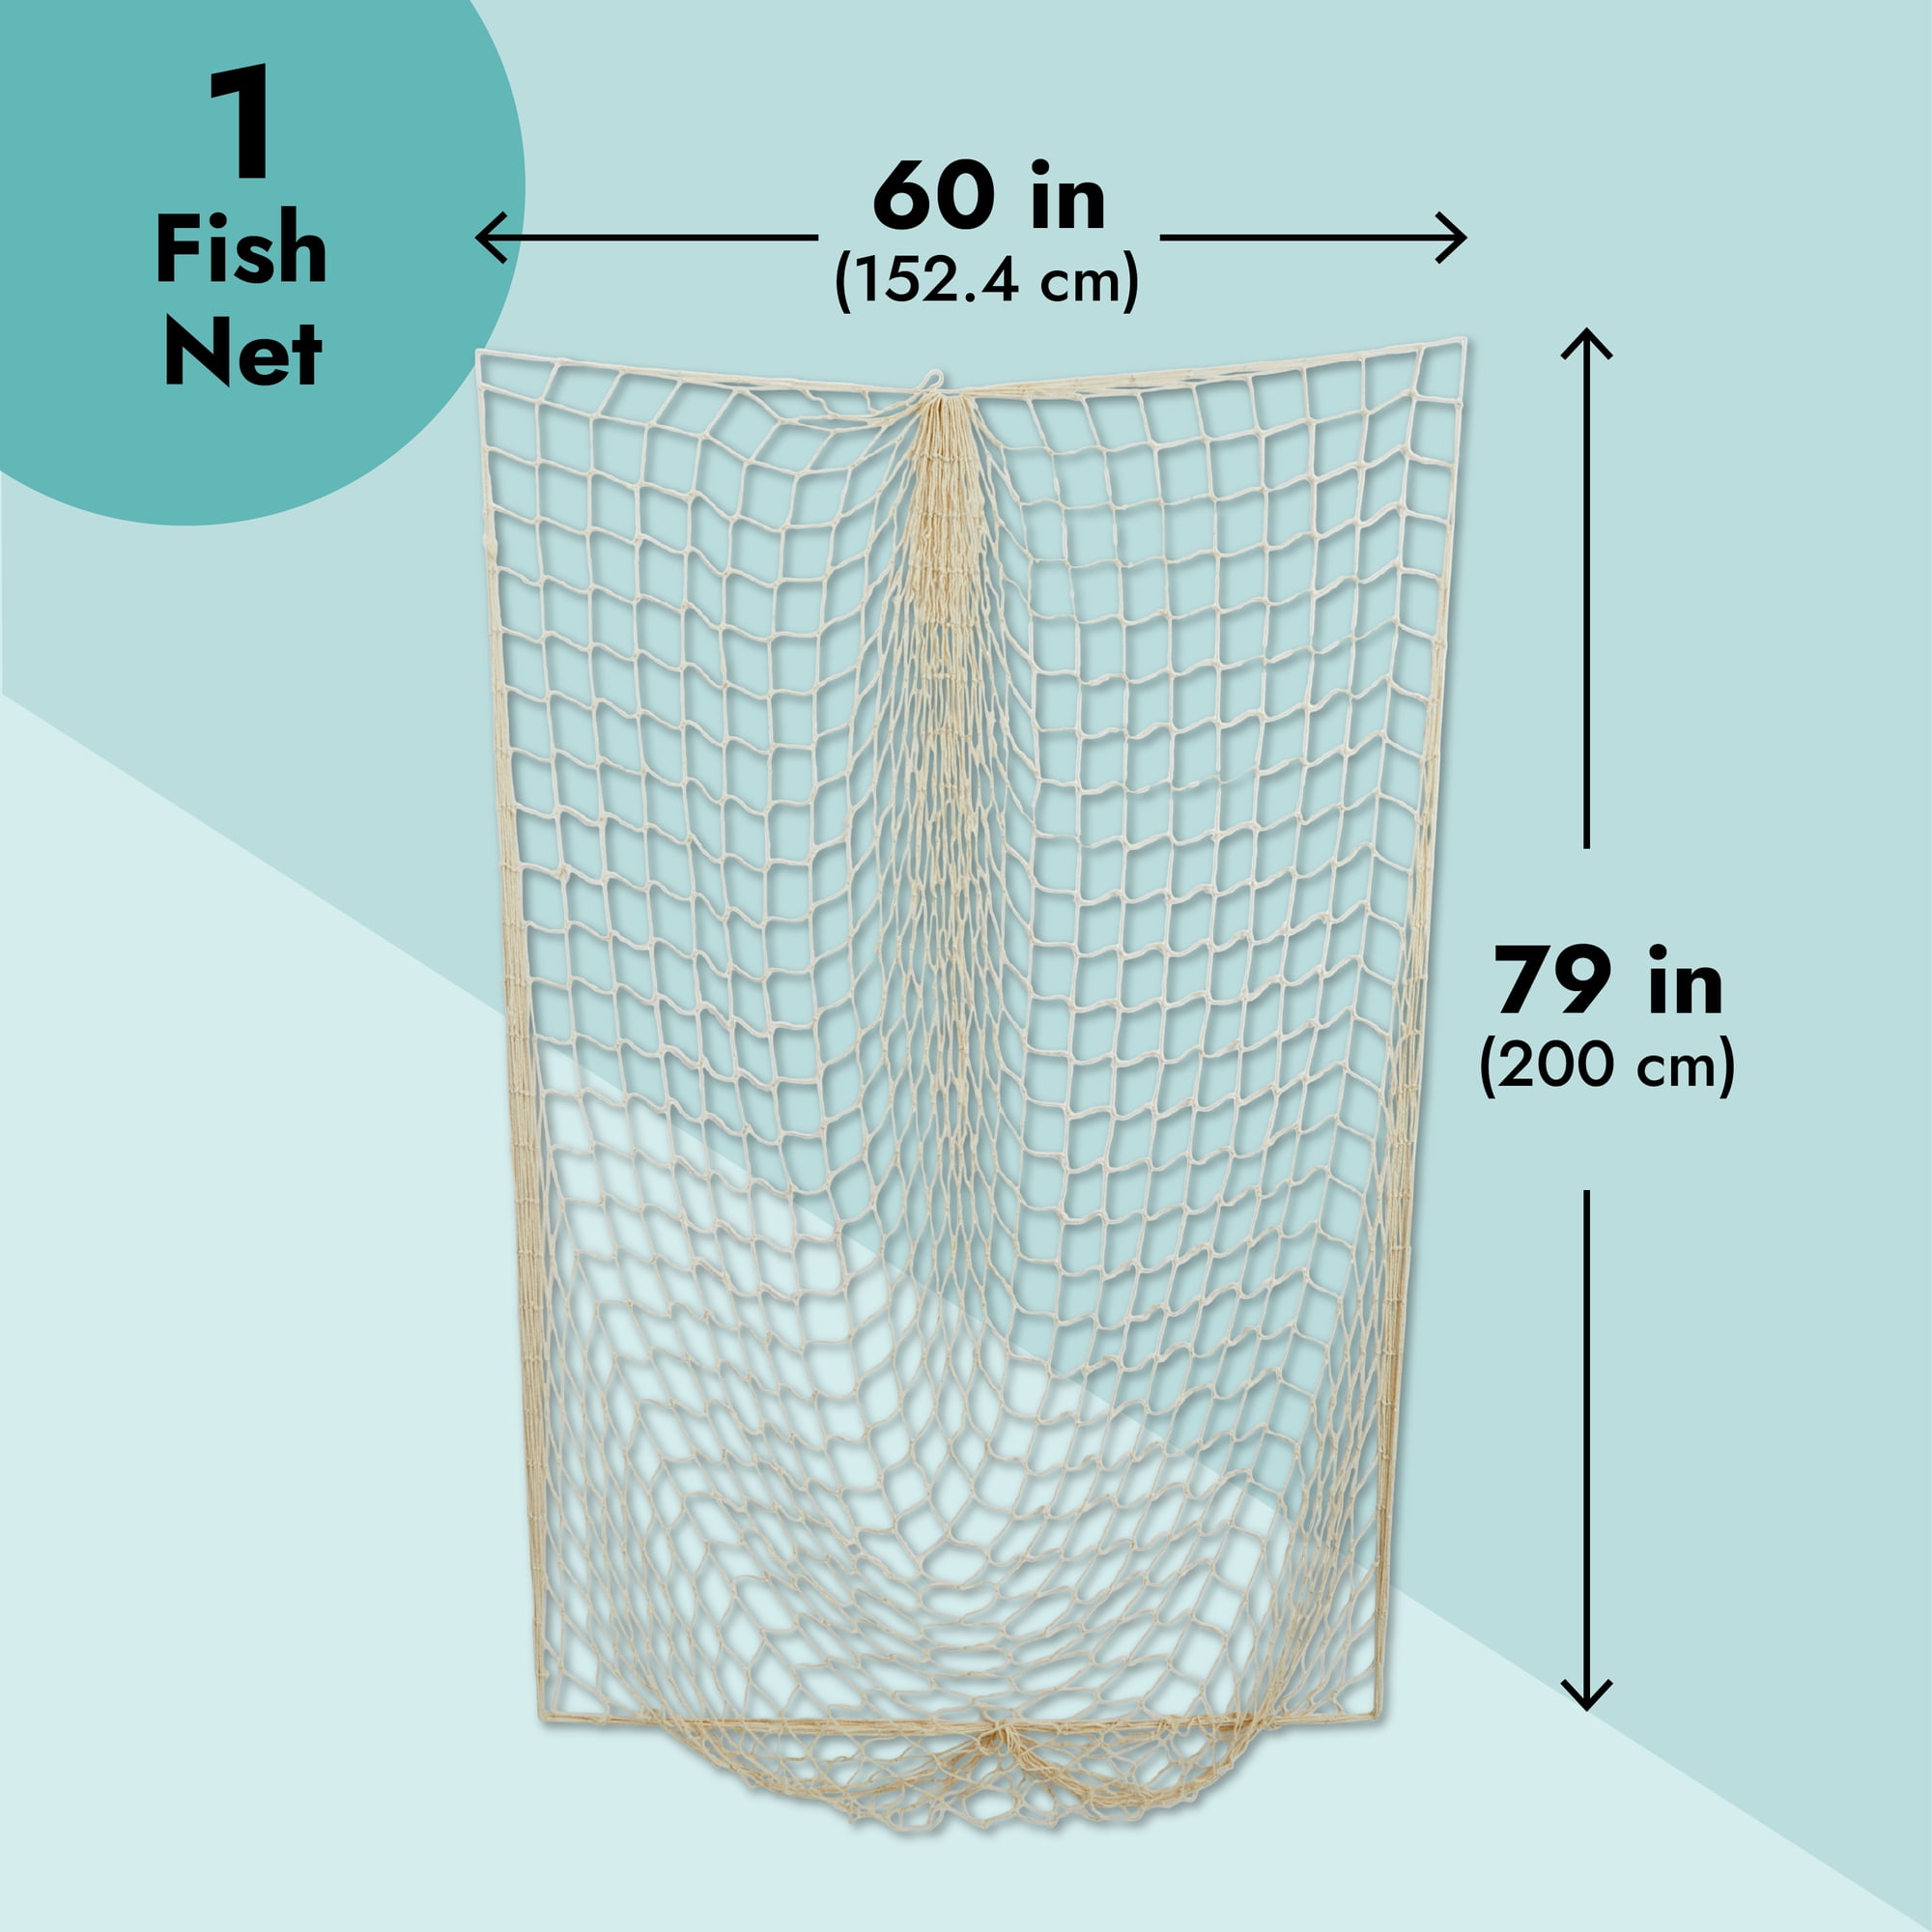 Natural Fish Net Decoration Wall Hanging Cotton Fishnet Decor for  Underwater Hawaiian, Nautical Ocean Theme Beach Bash Party Decoration 